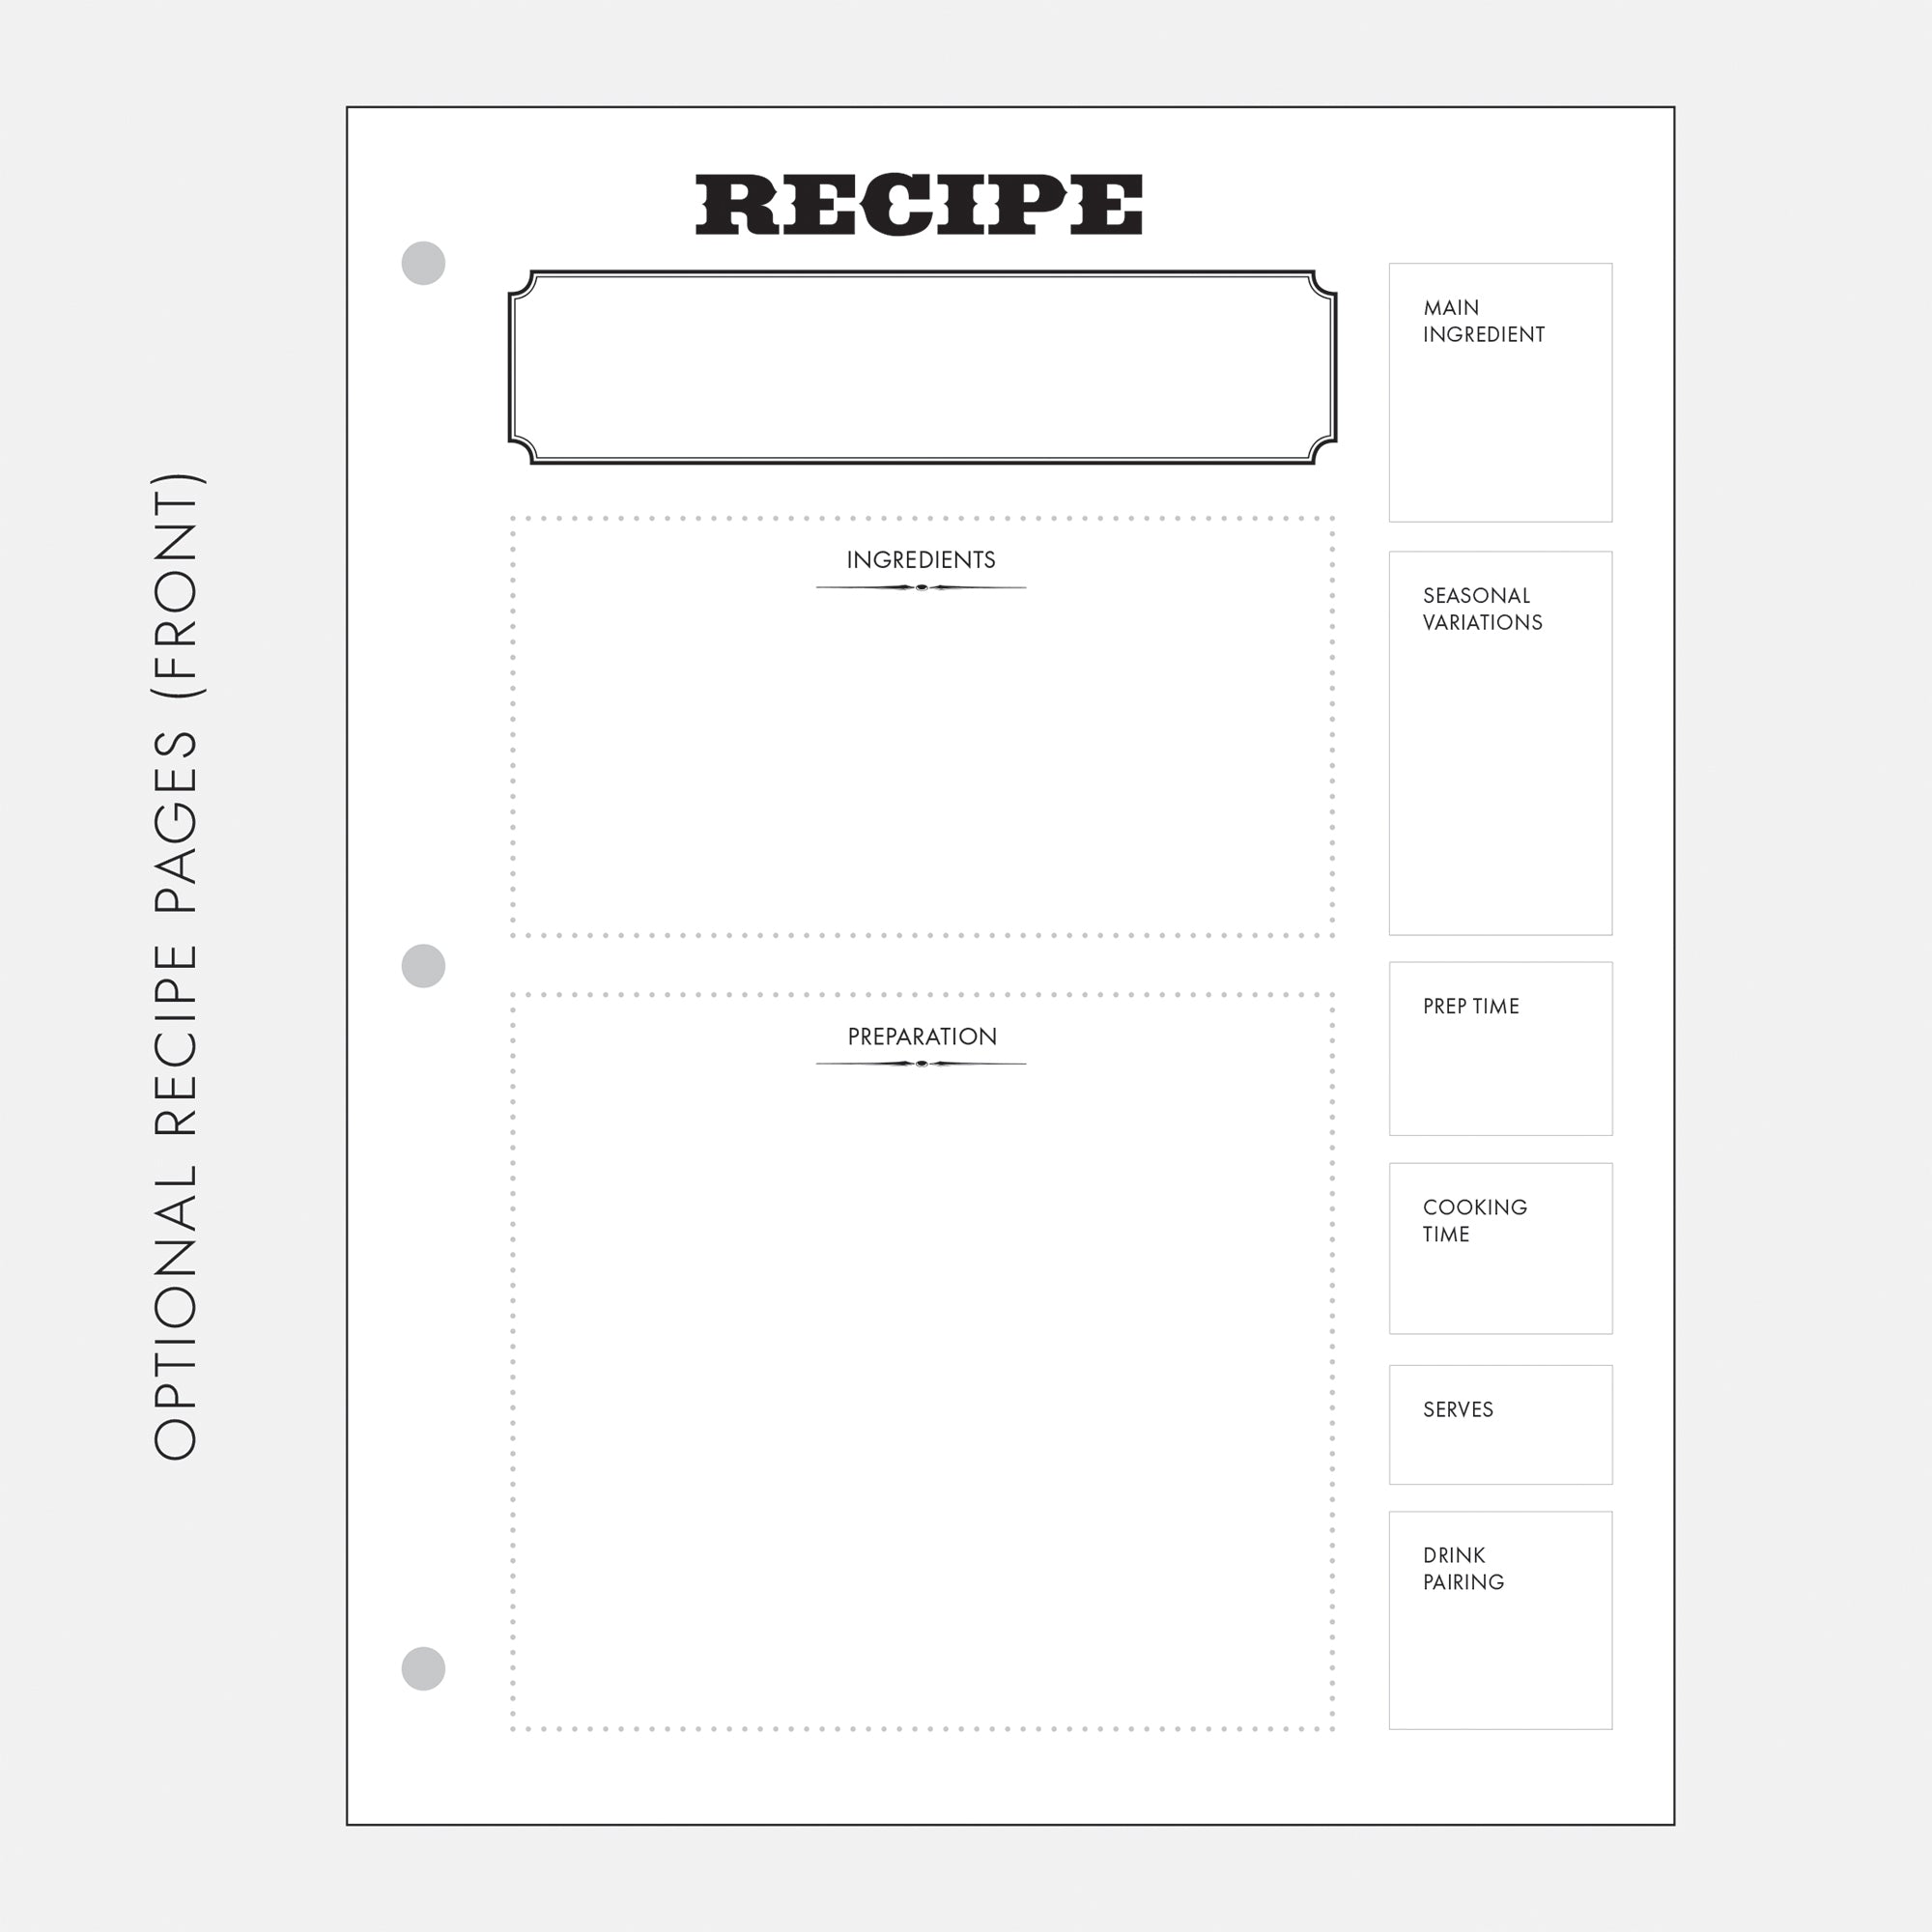 Refill Pages For Large Recipe Album - New Kitchen Store